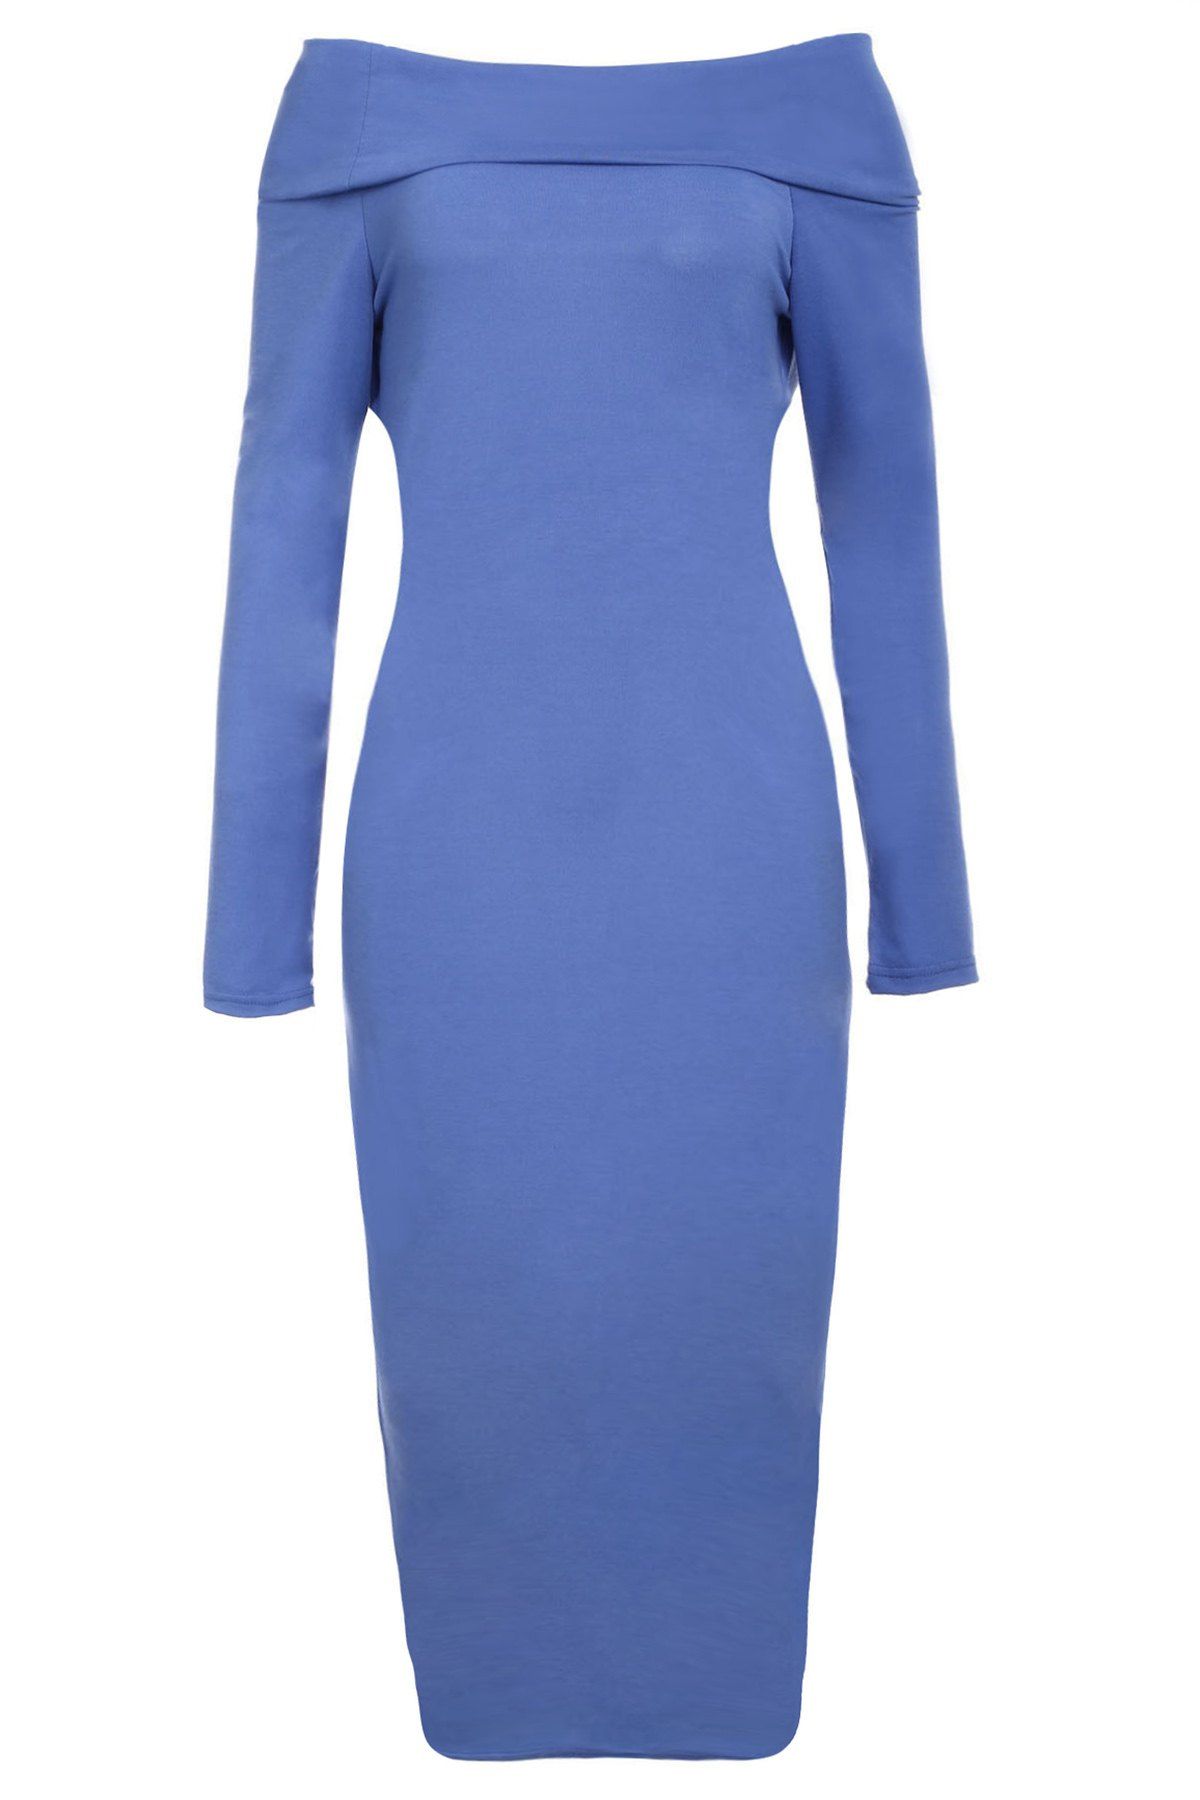 Sexy Off-The-Shoulder Long Sleeve Bodycon Solid Color Women's Dress 